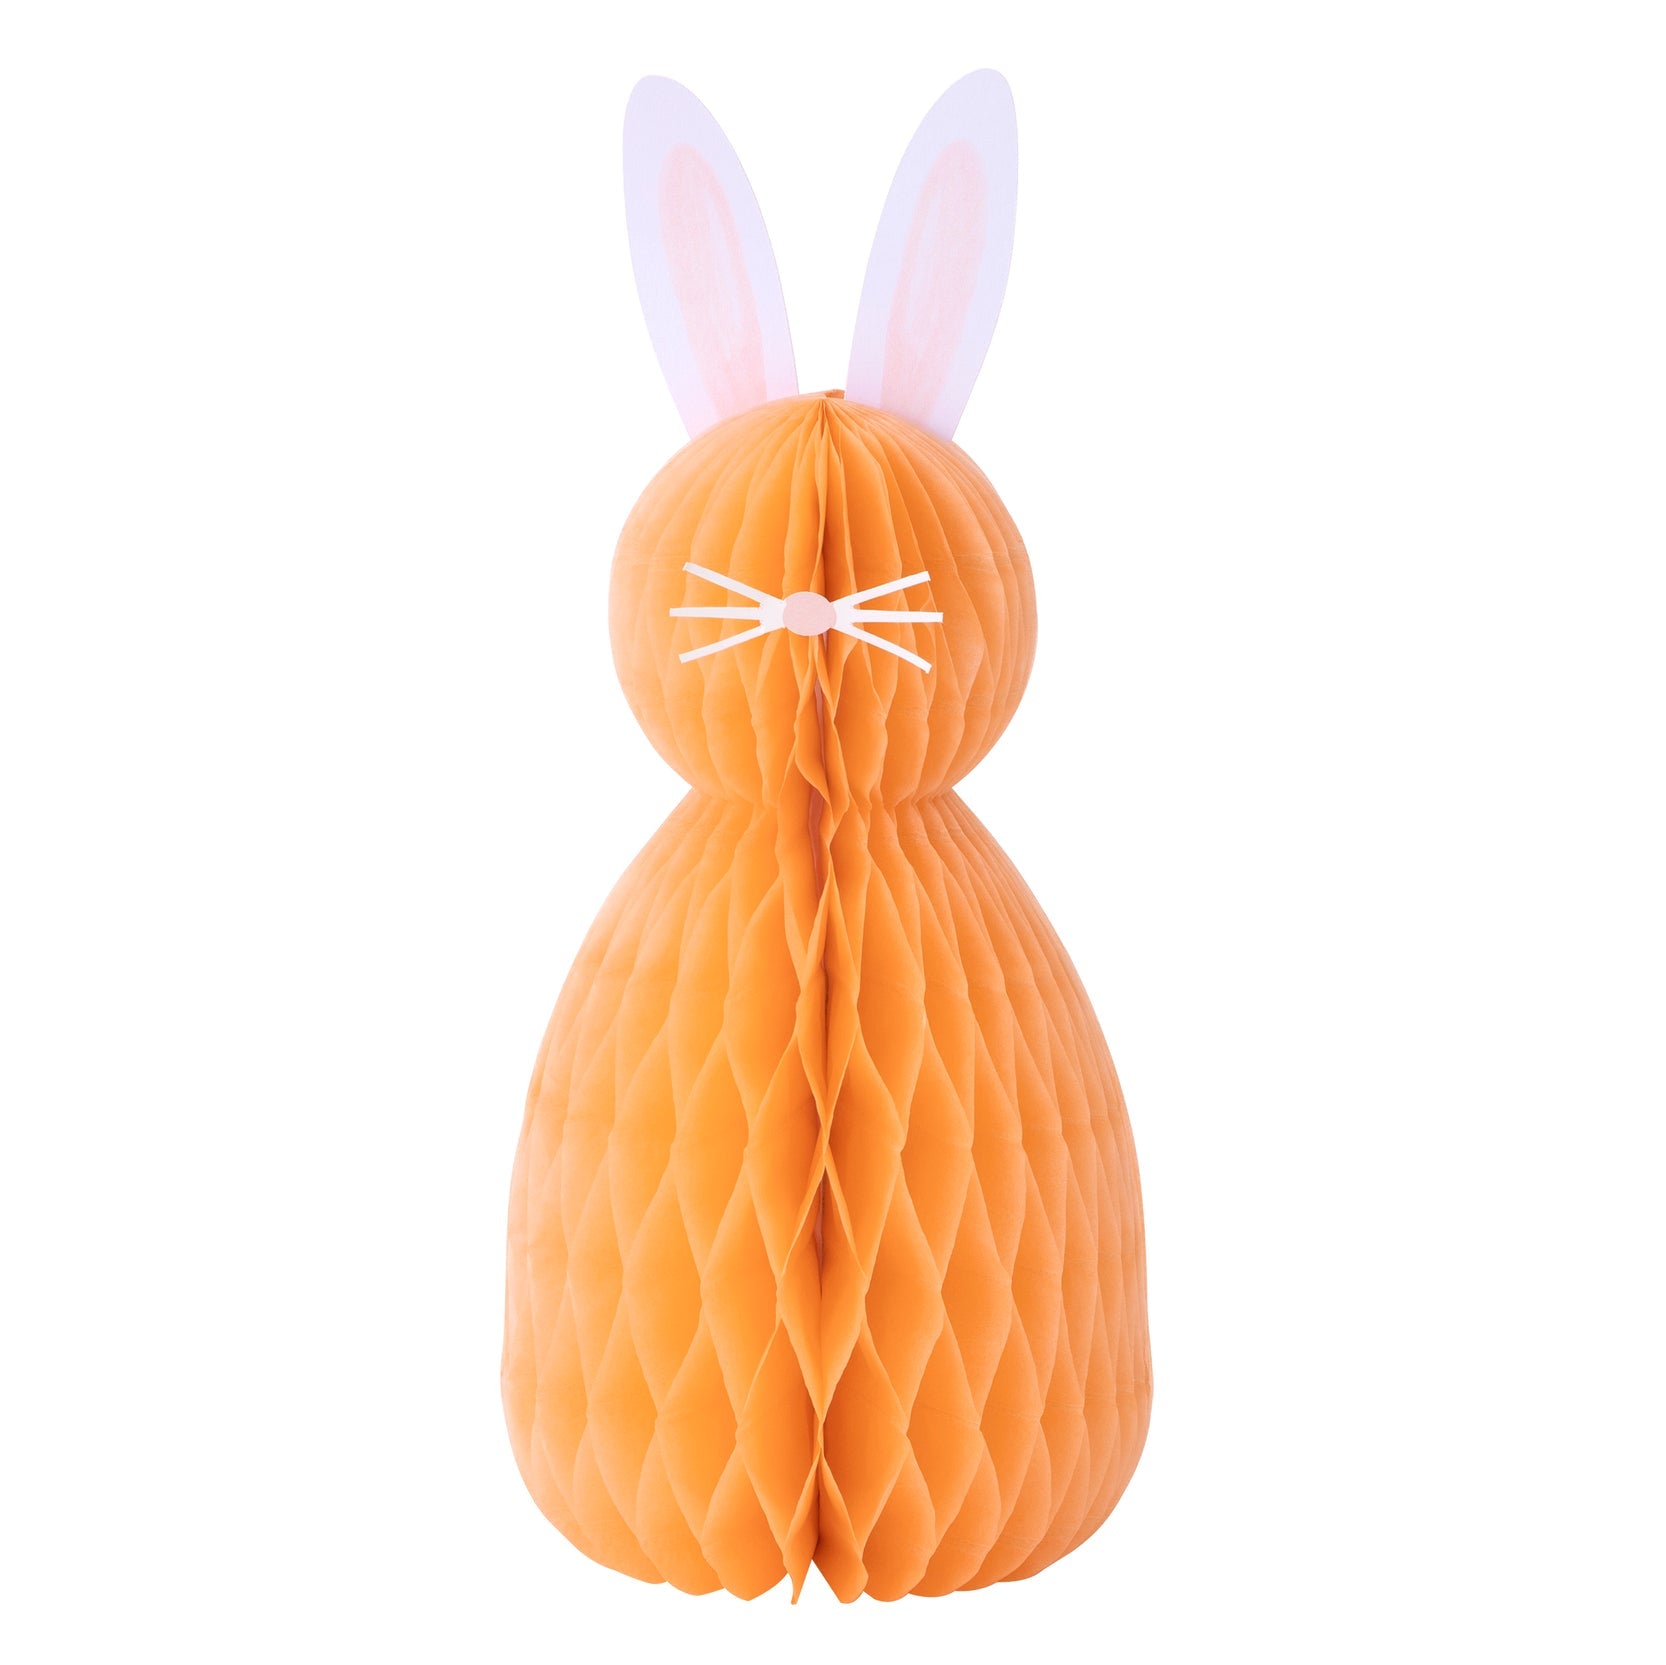 An Meri Meri Easter Honeycomb Decoration, perfect for Easter decorations.